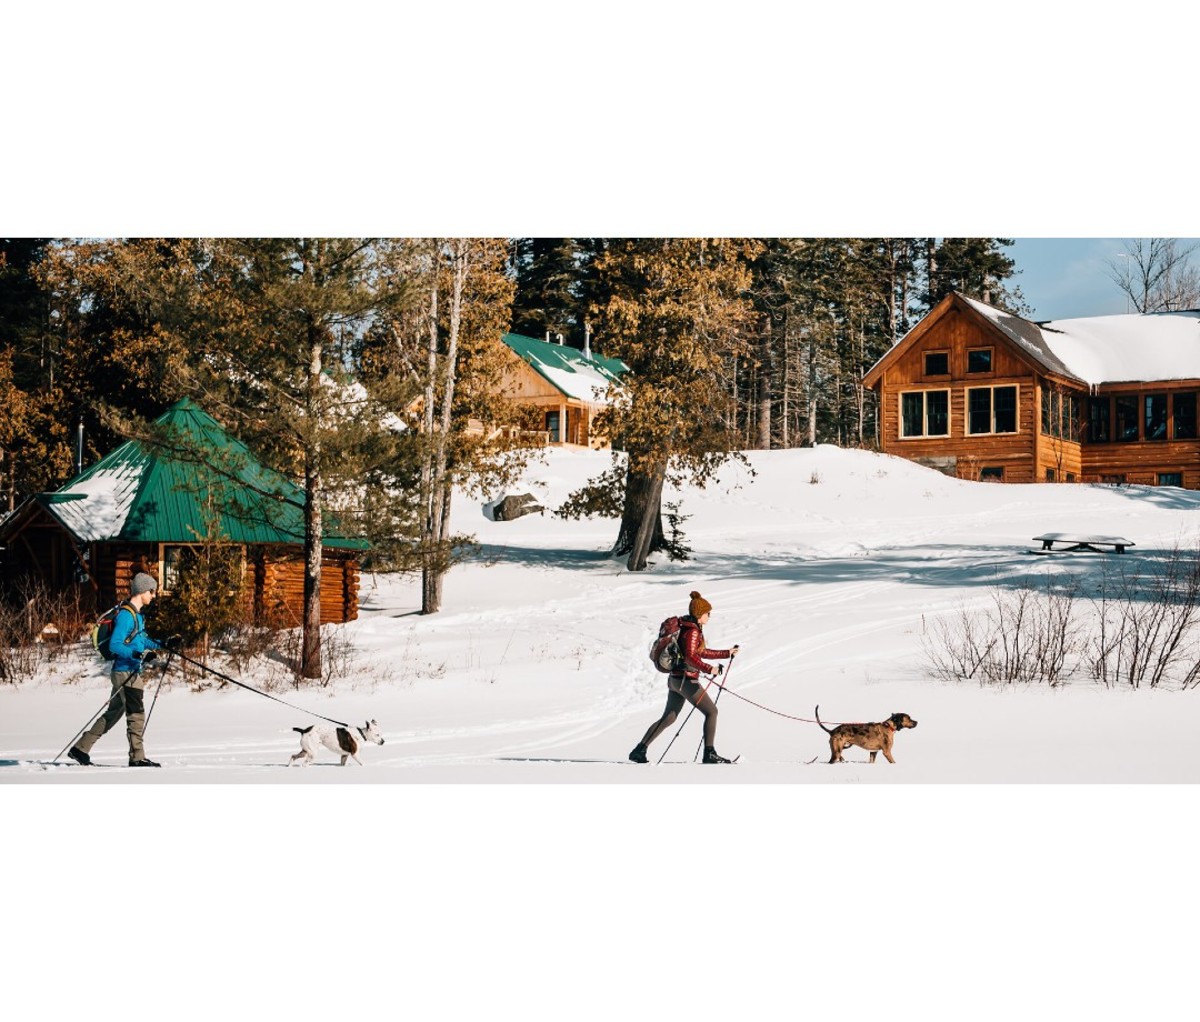 Man and woman walking dogs in snow with cabin in background